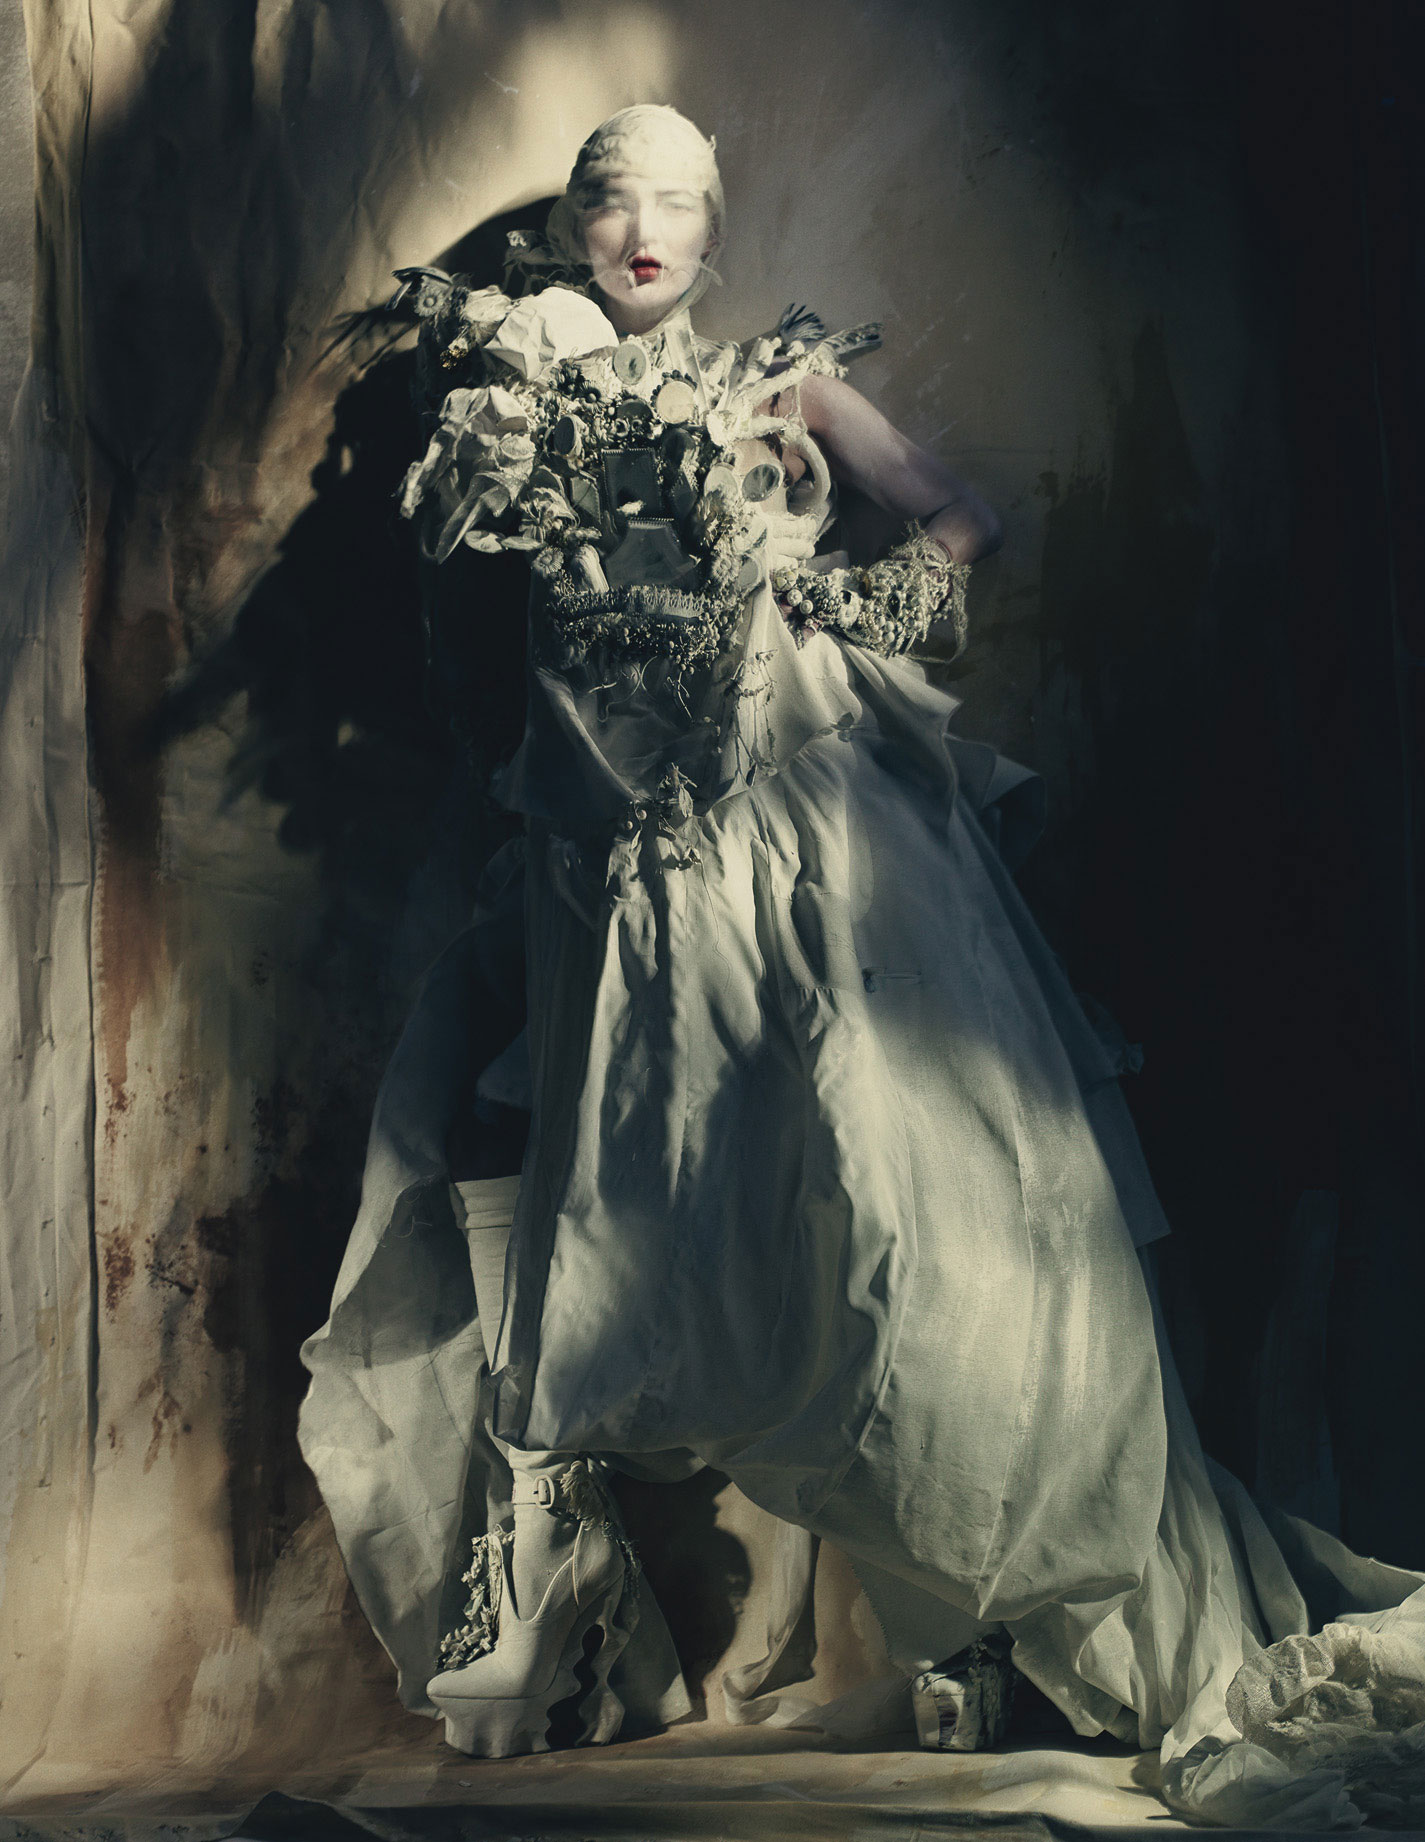 kate-moss-by-paolo-roversi-for-w-magazine-april-2015-10